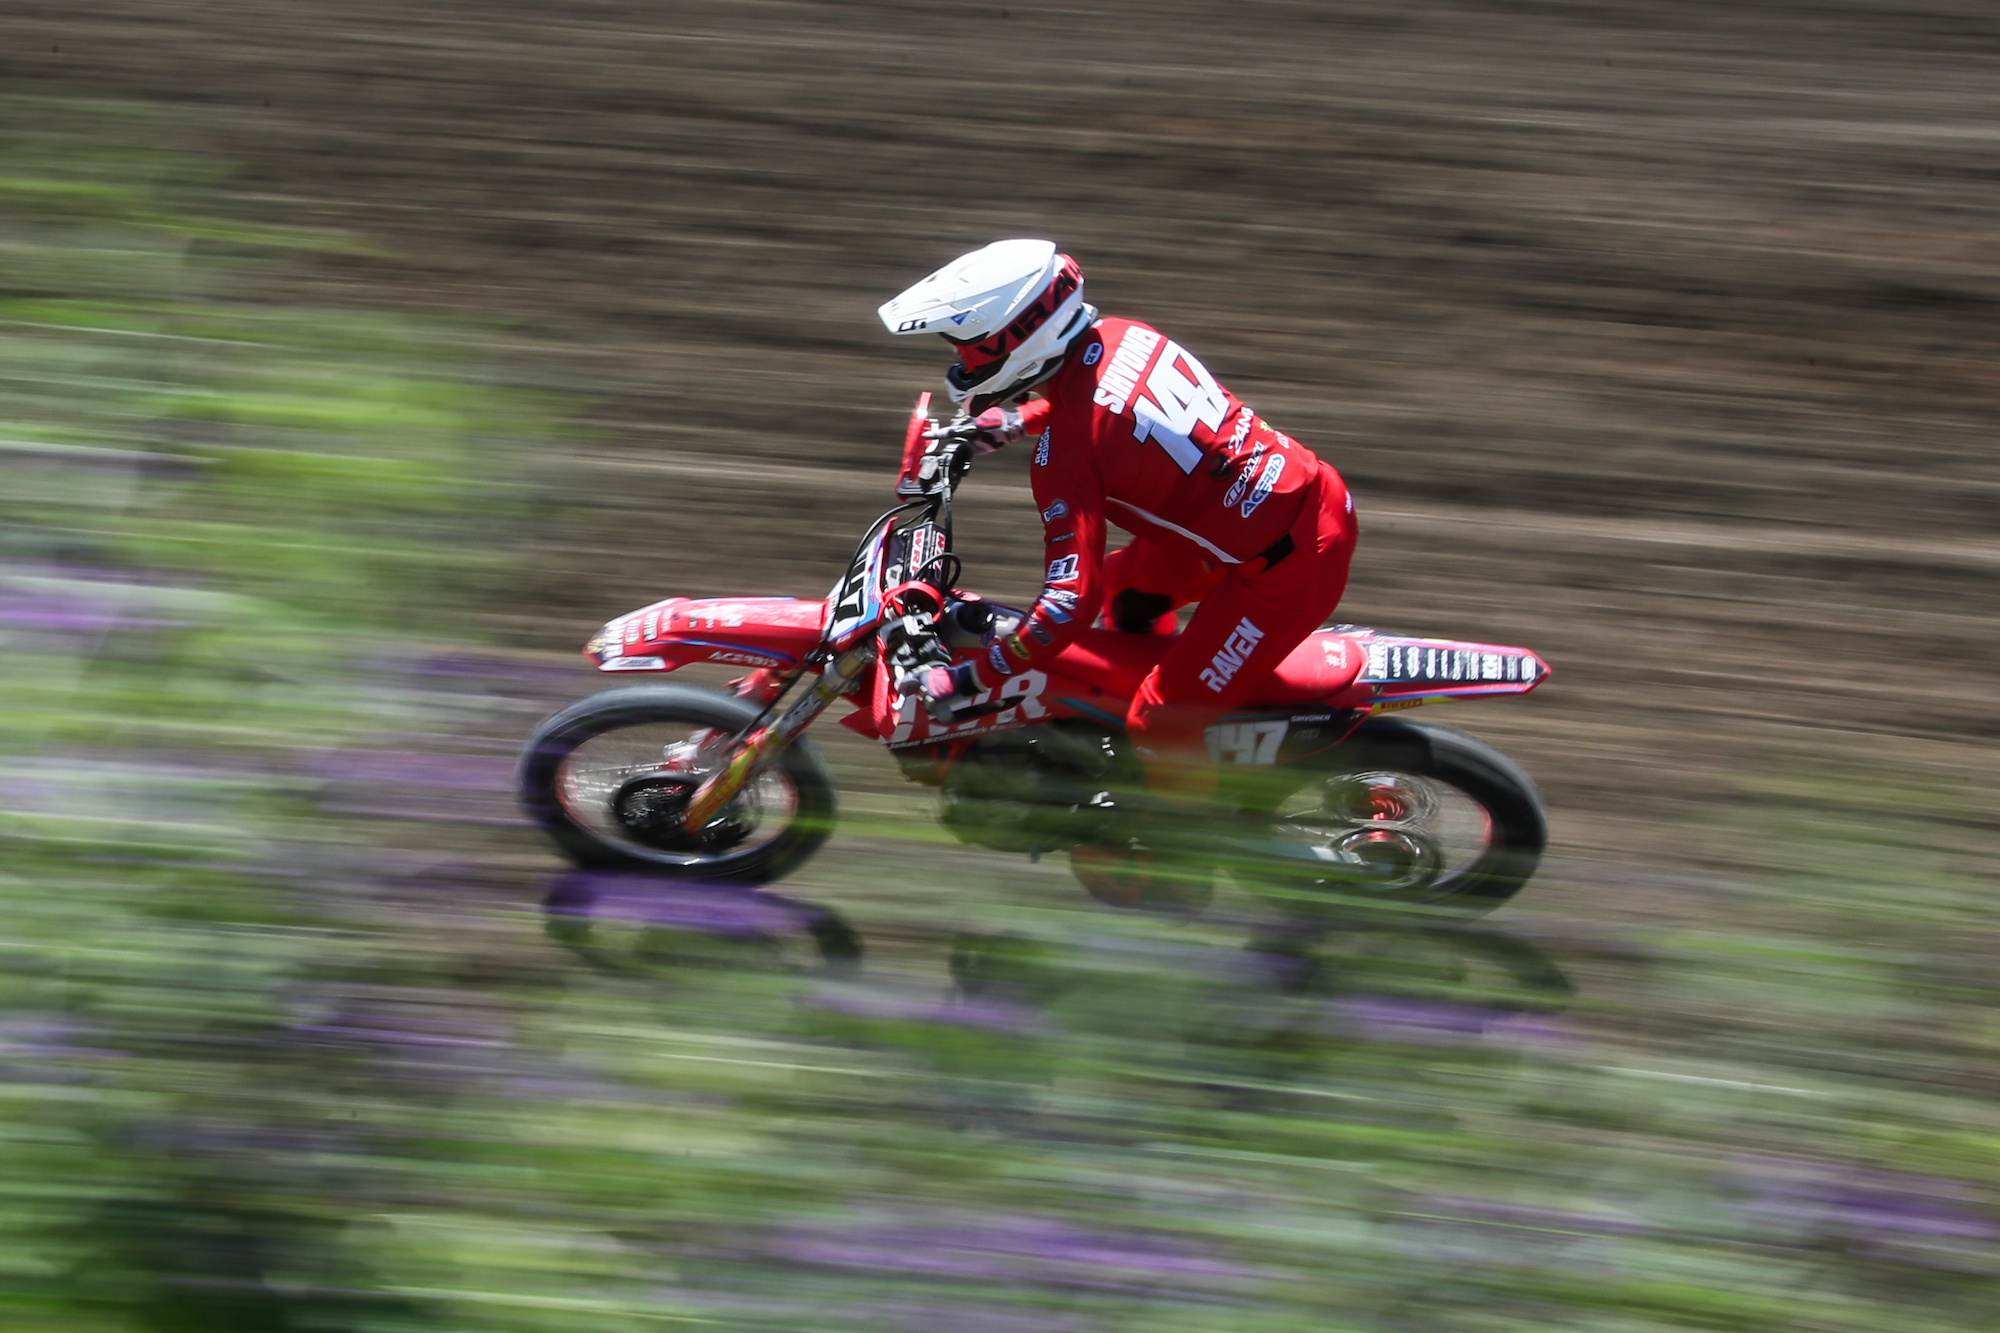 A motorcycle rider races in a 2021 motocross event